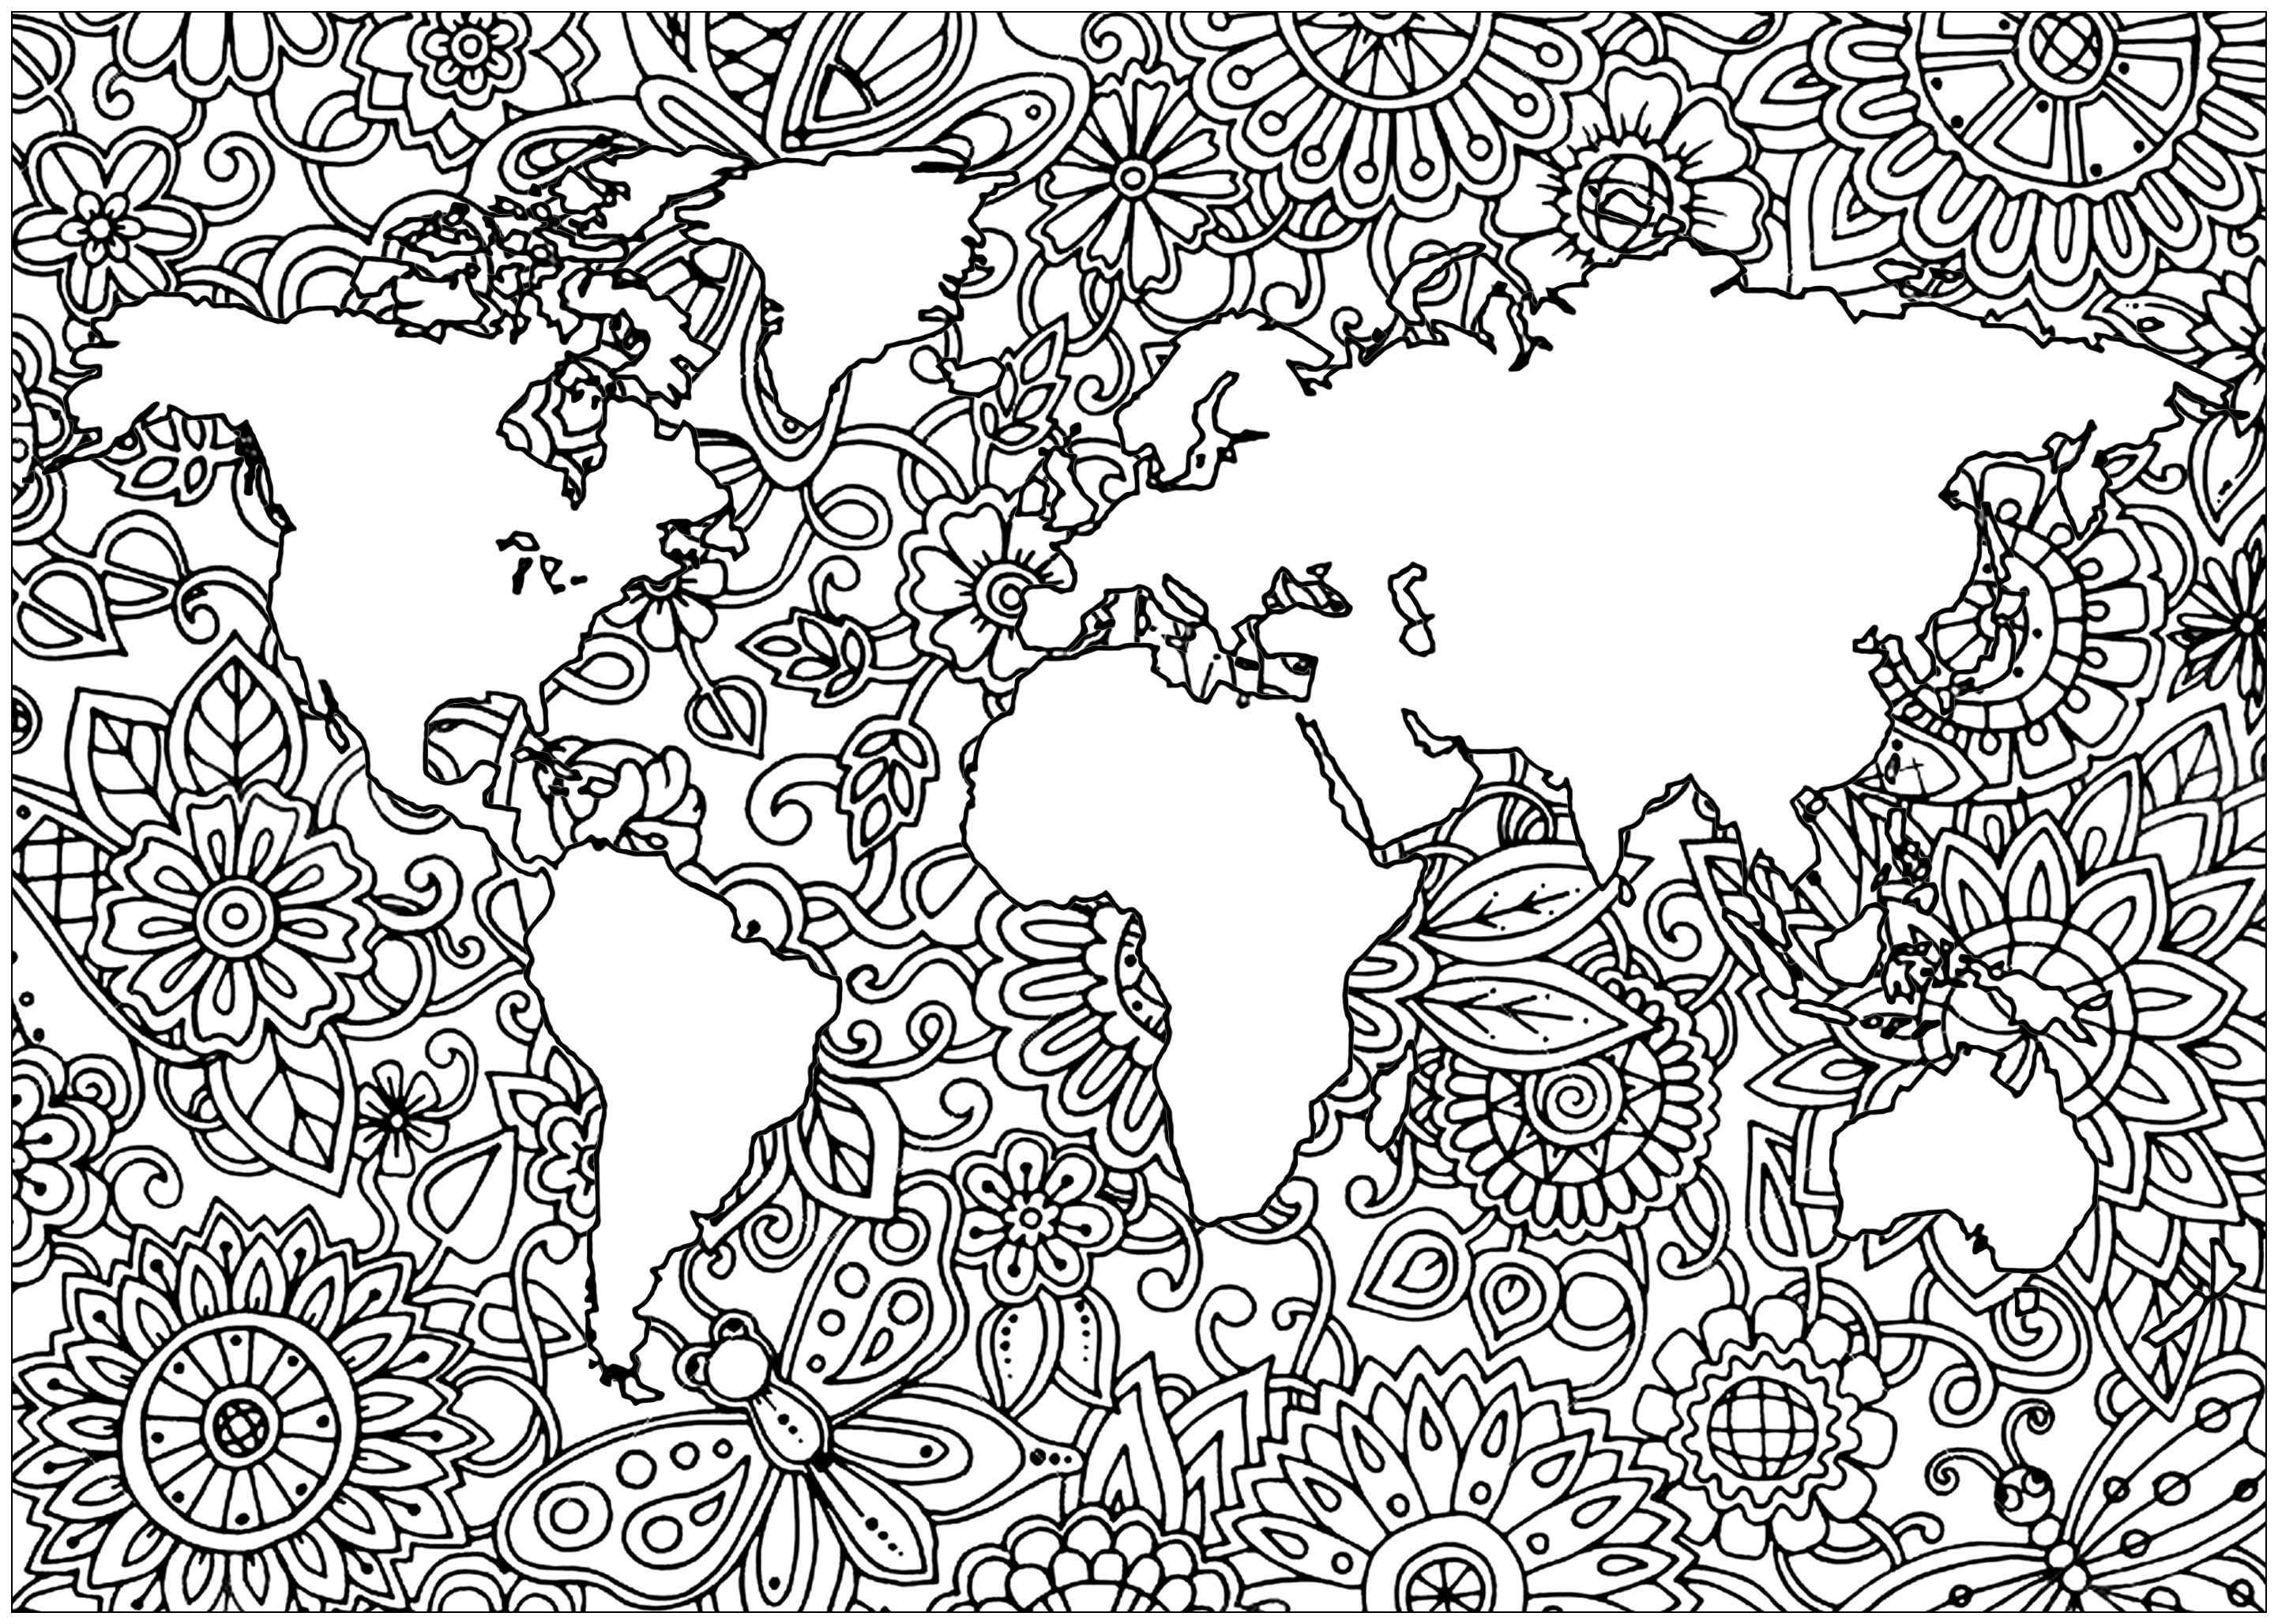 Planet with Flowers - Anti stress Adult Coloring Pages